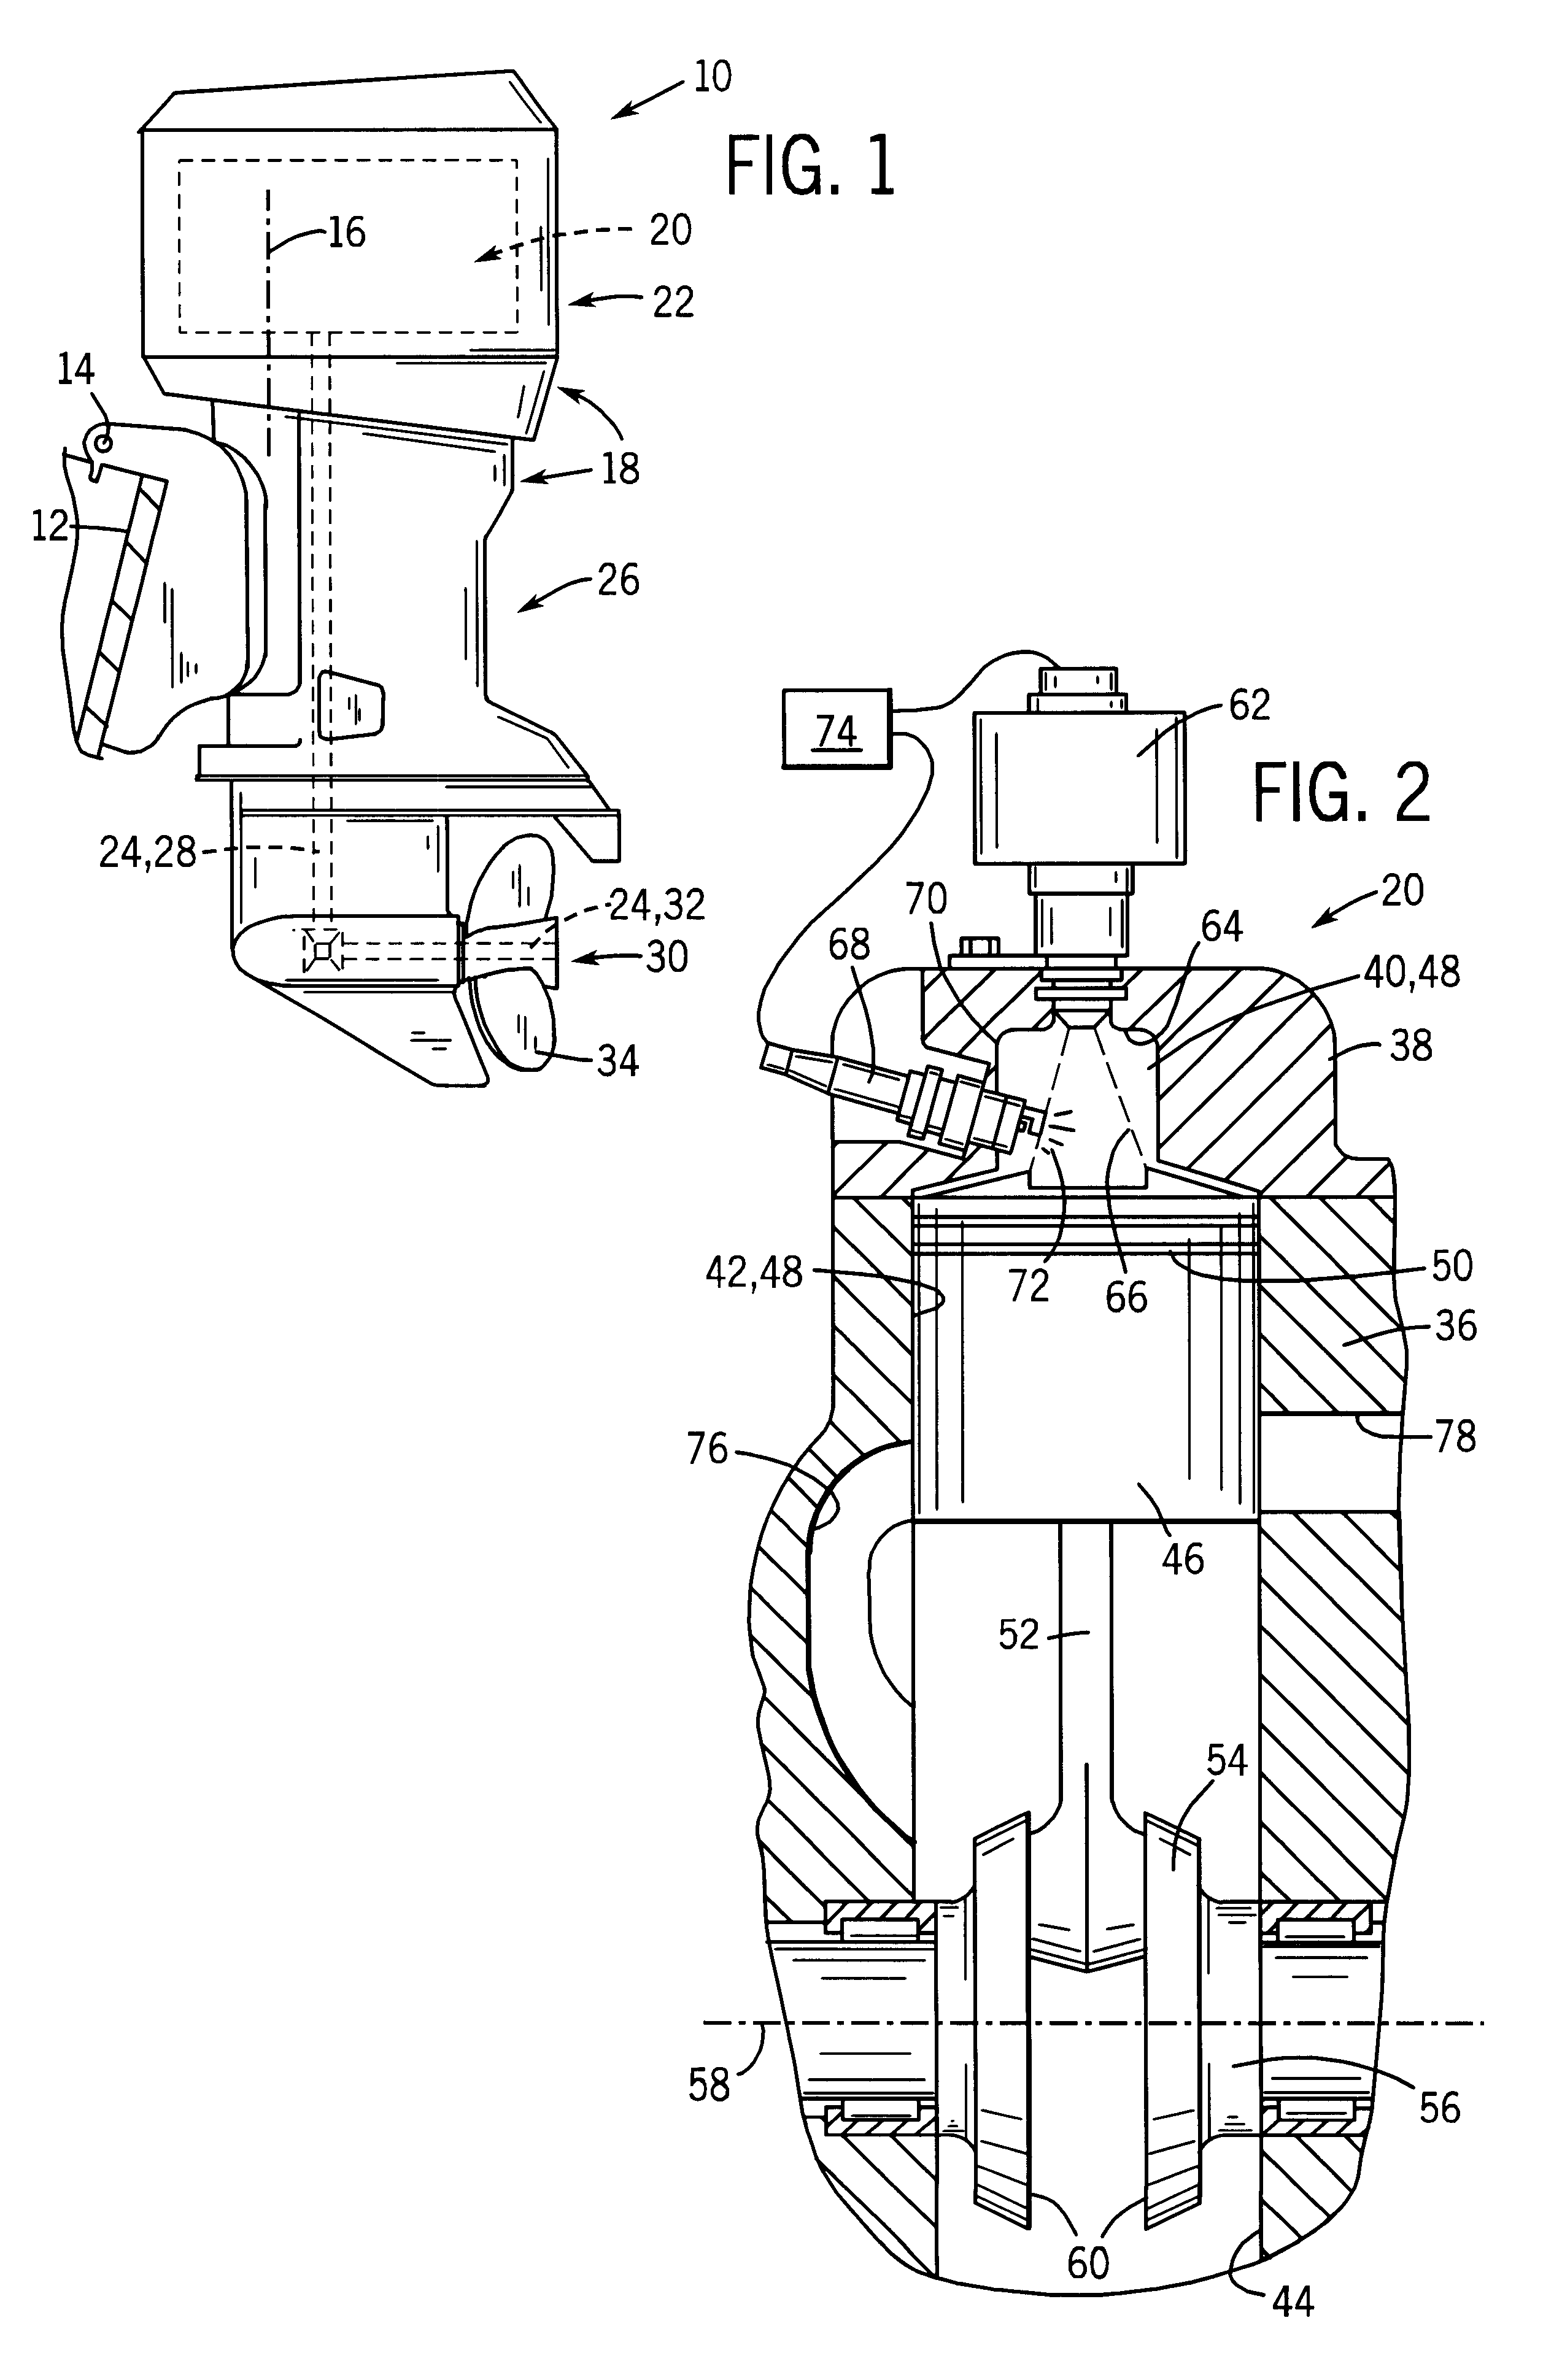 Method and apparatus for identifying parameters of an engine component for assembly and programming